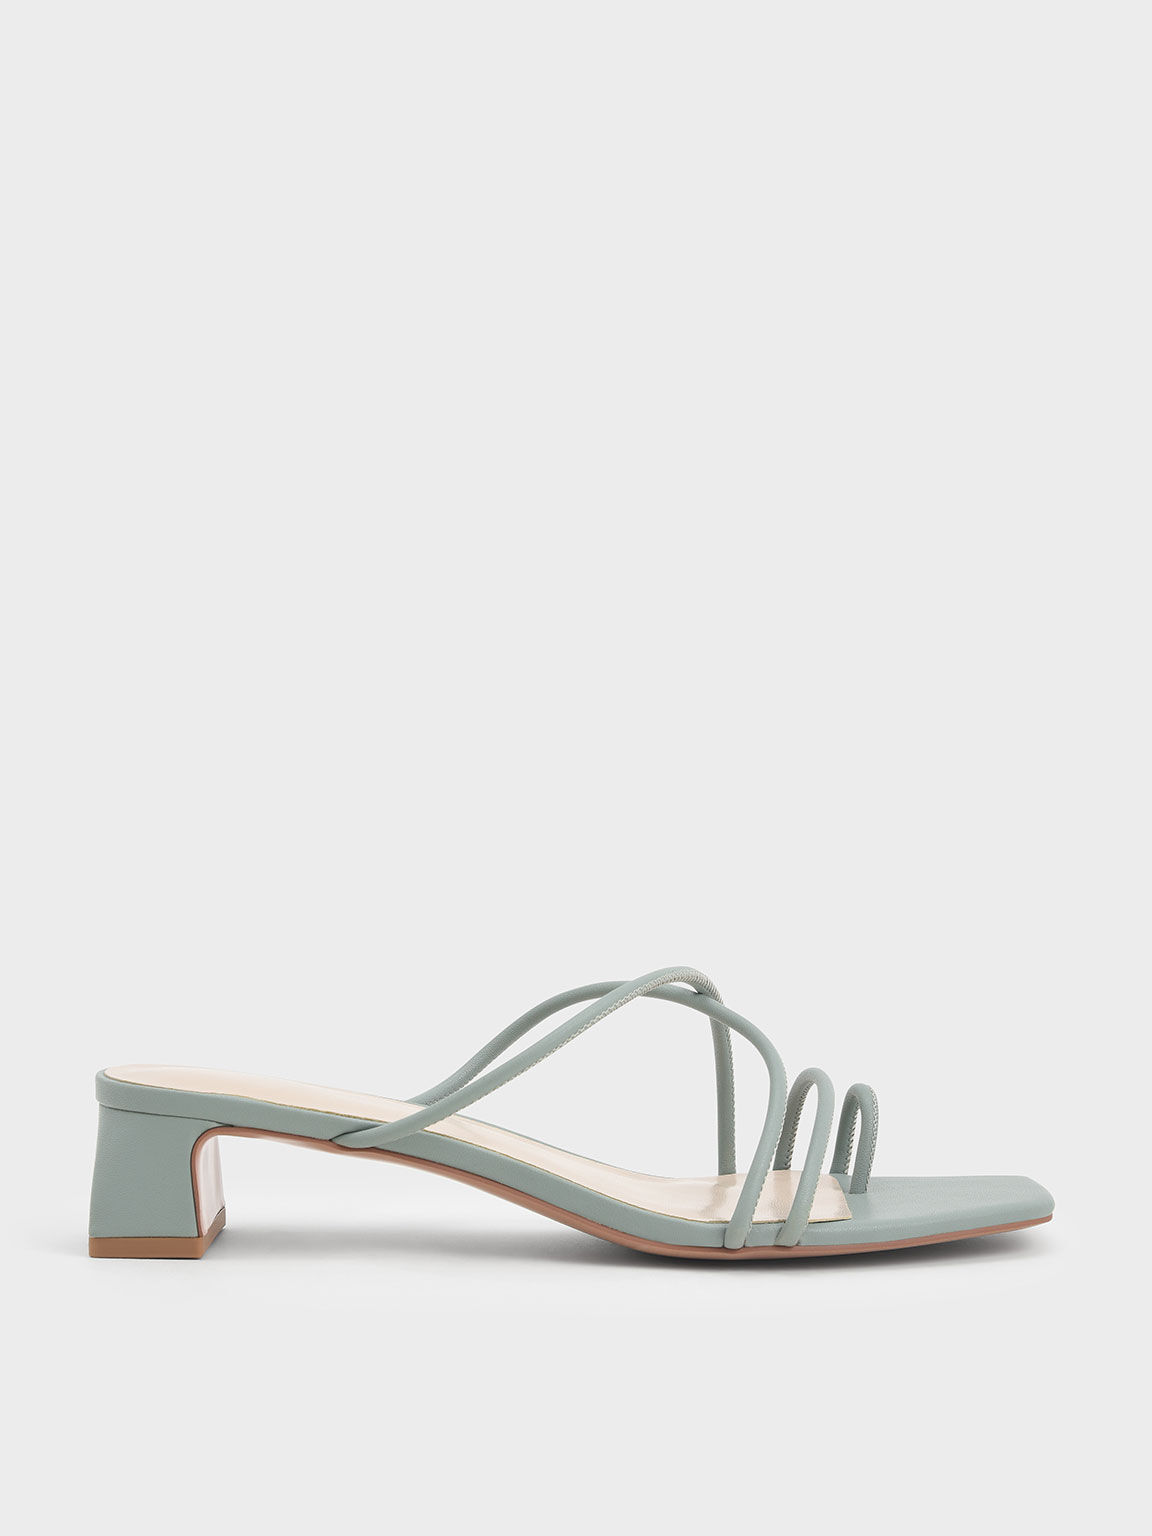 Meadow Strappy Toe Ring Sandals, Sage Green, hi-res